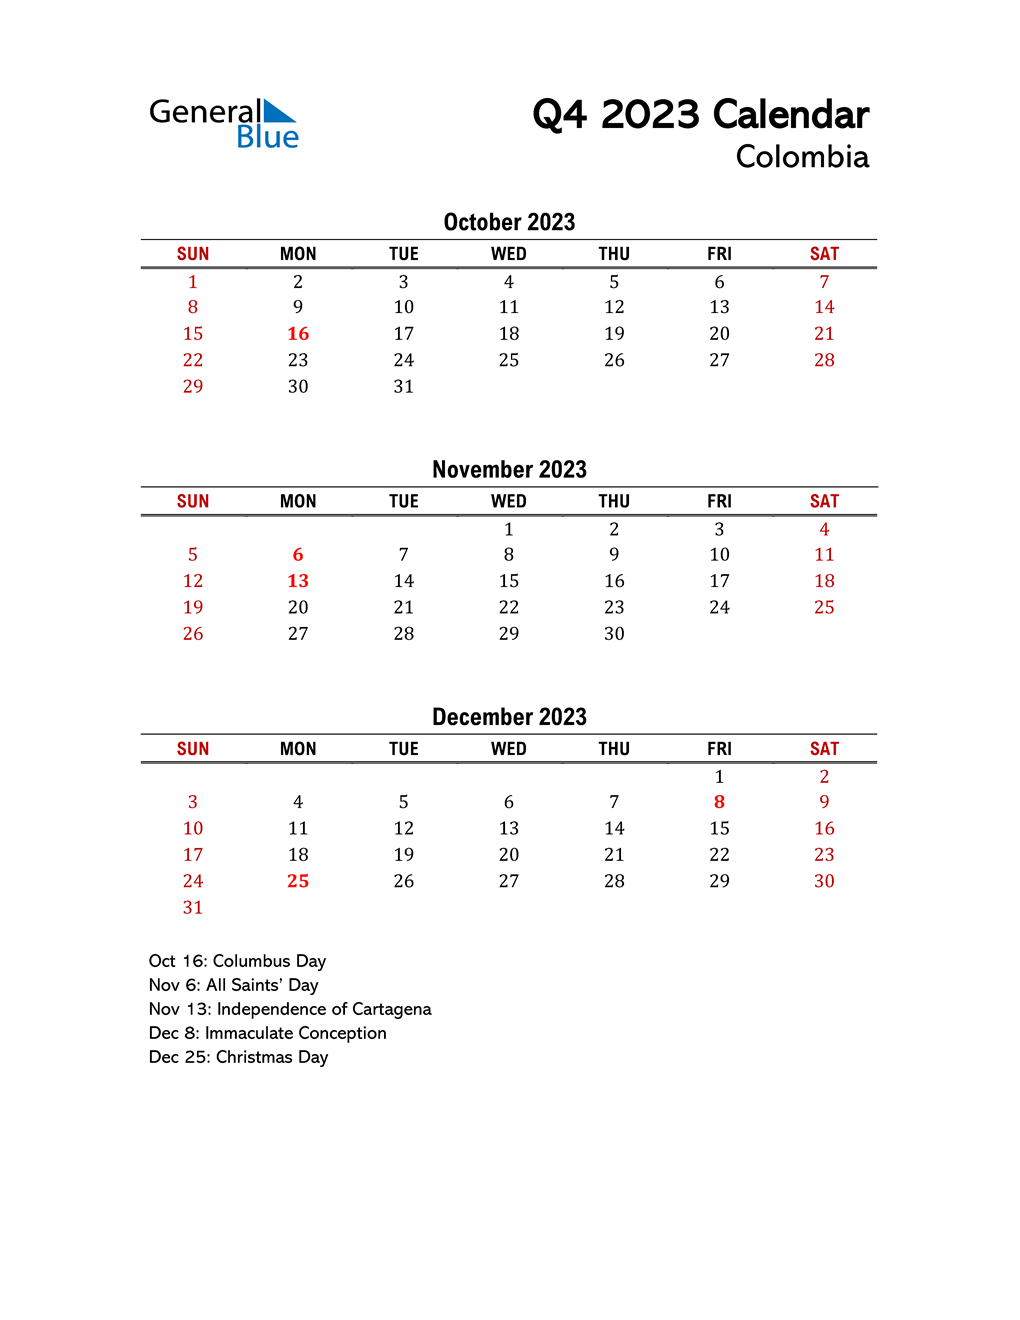 Q4 2023 Quarterly Calendar with Colombia Holidays